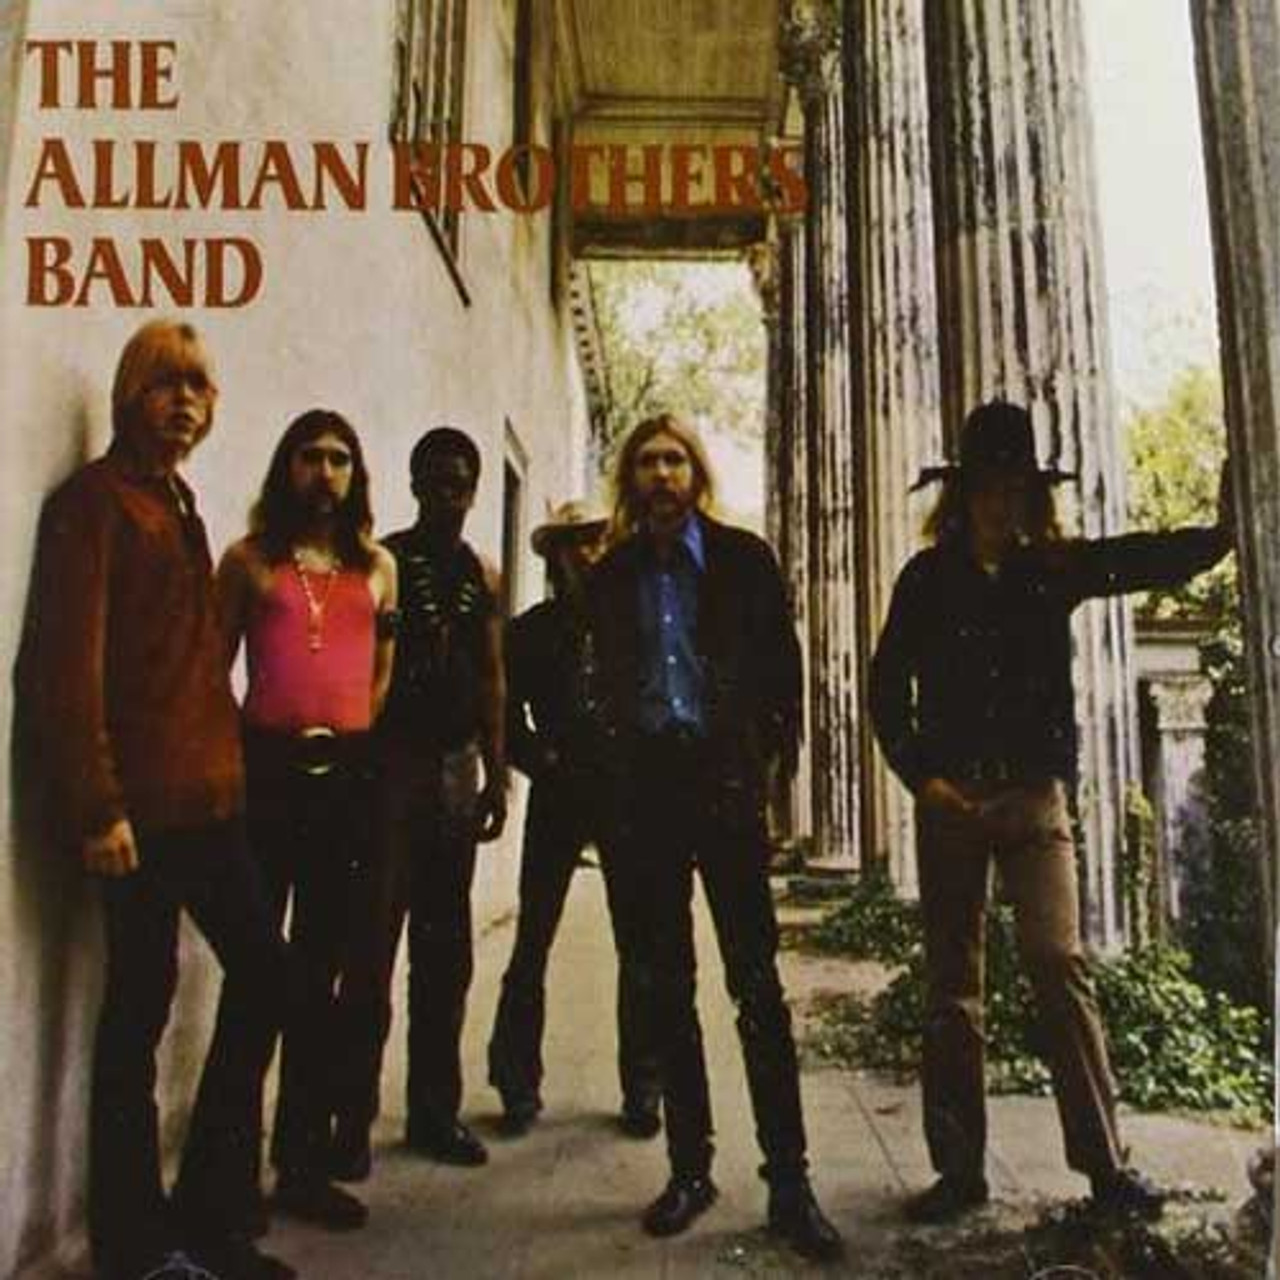 The Allman Brothers Band LP